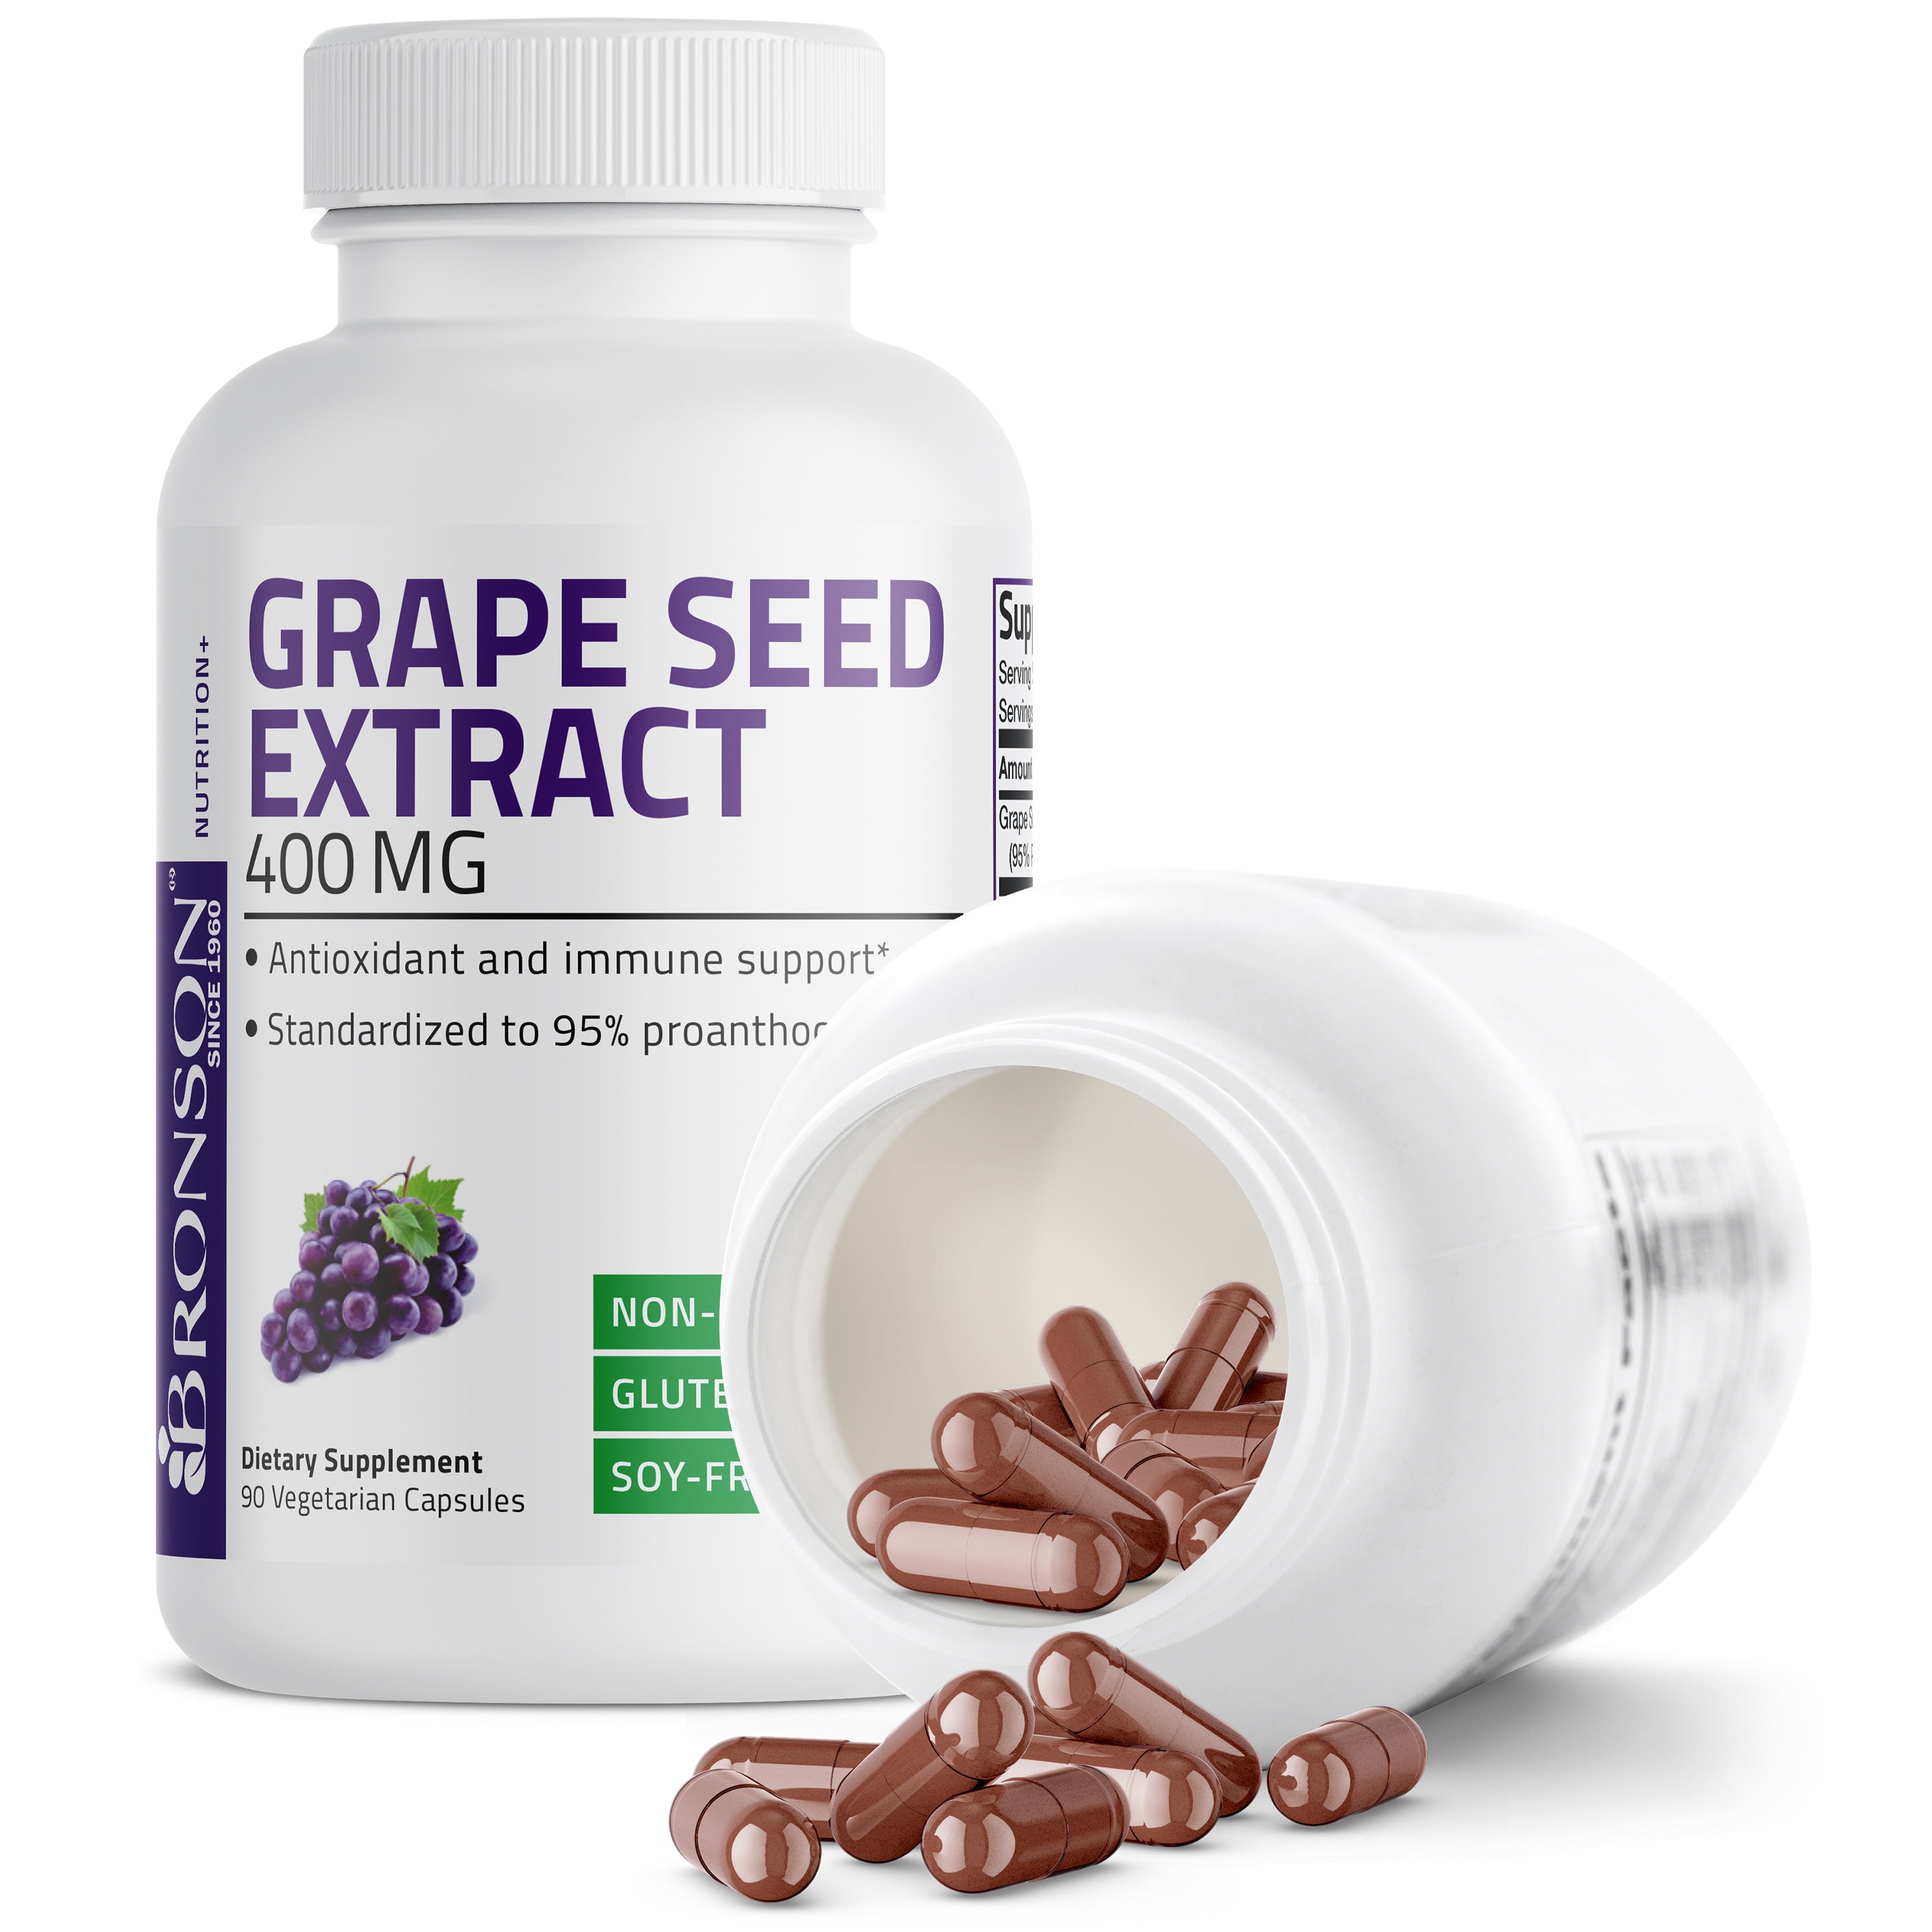 Grape Seed Extract Non-GMO - 400 mg view 11 of 6